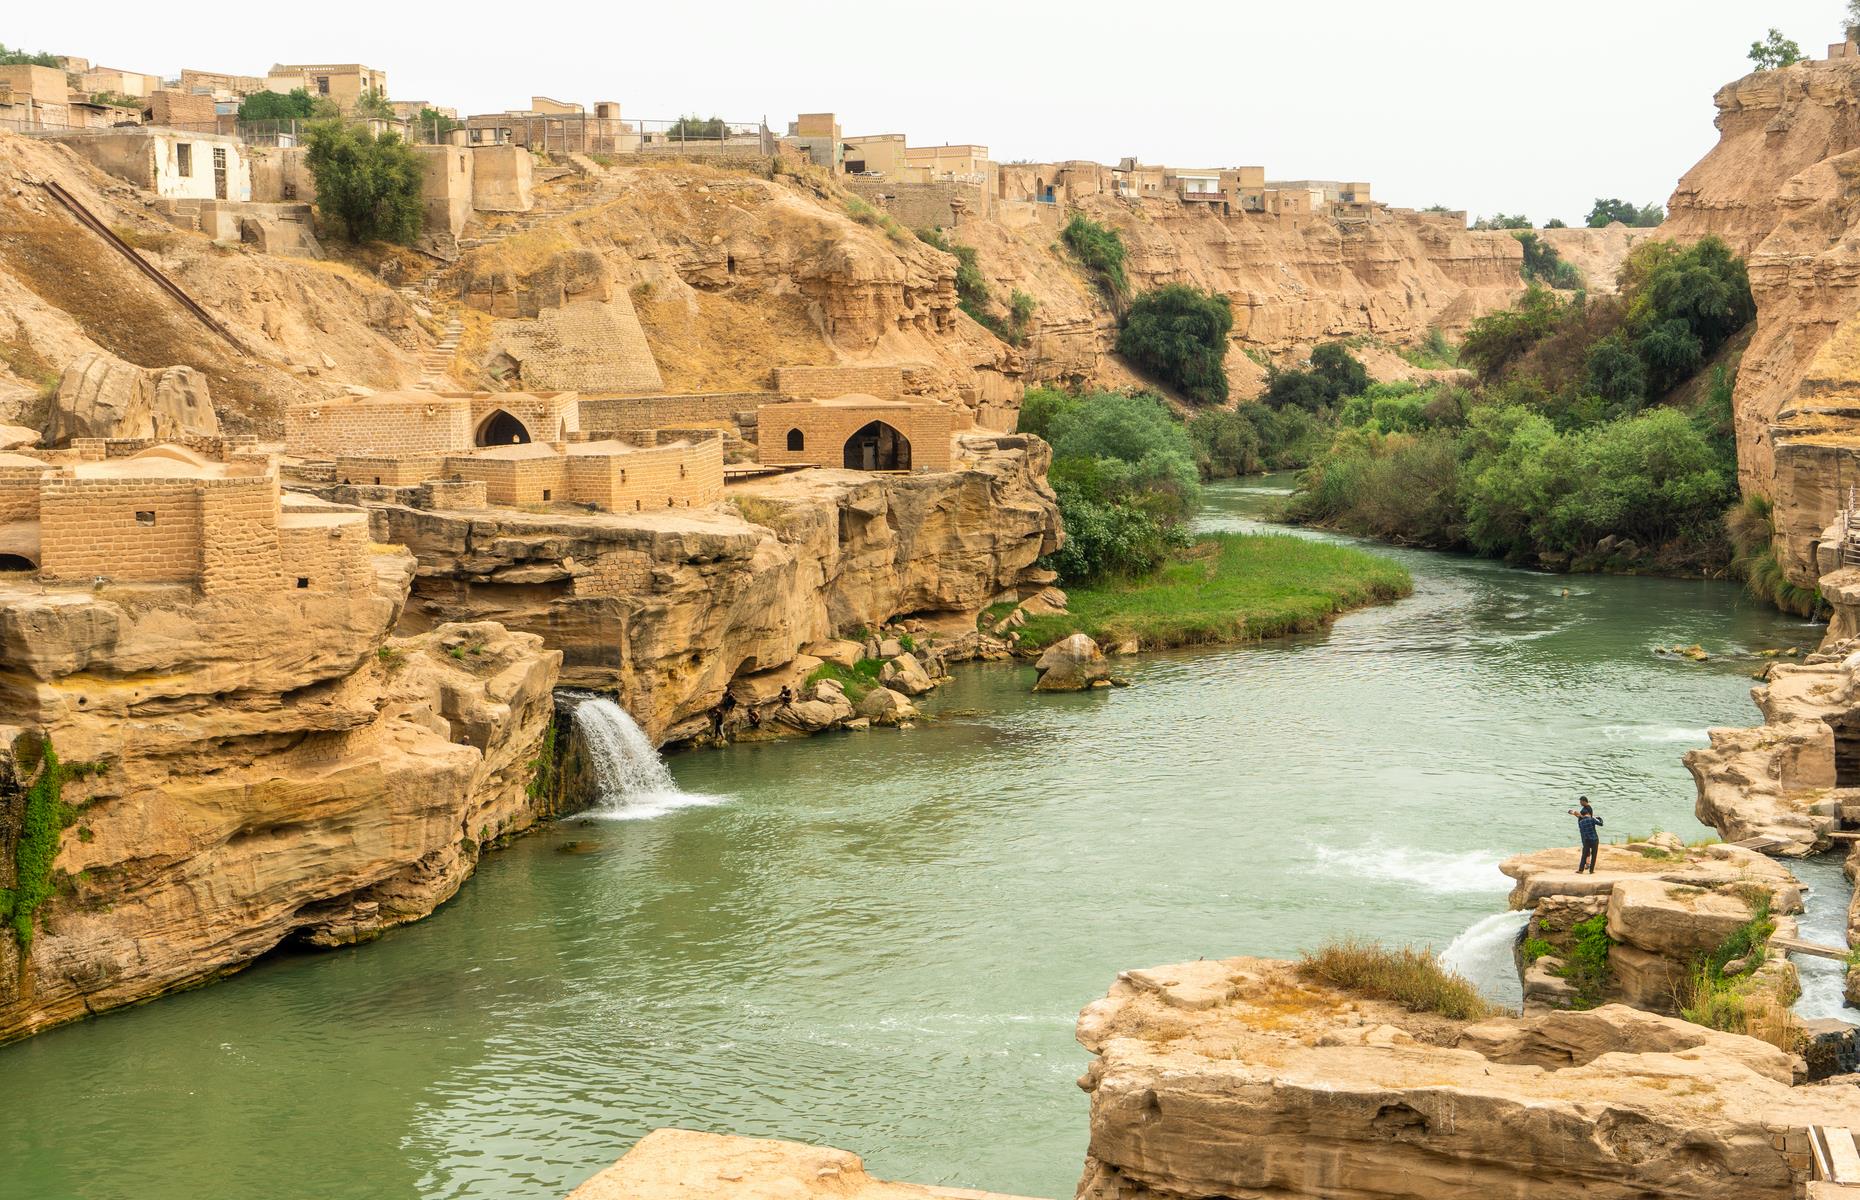 Described as a “masterpiece of creative genius” by UNESCO, the historical hydraulic system at Shushtar with its interconnected set of bridges, weirs and dams, mills, water cascades, canals, and tunnel is indeed a marvel. The origins of the ancient, fortified city of Shushtar, which sits at the foot of the Zagros Mountains, and its impressive water treatment systems can be traced back to the 5th century BC.